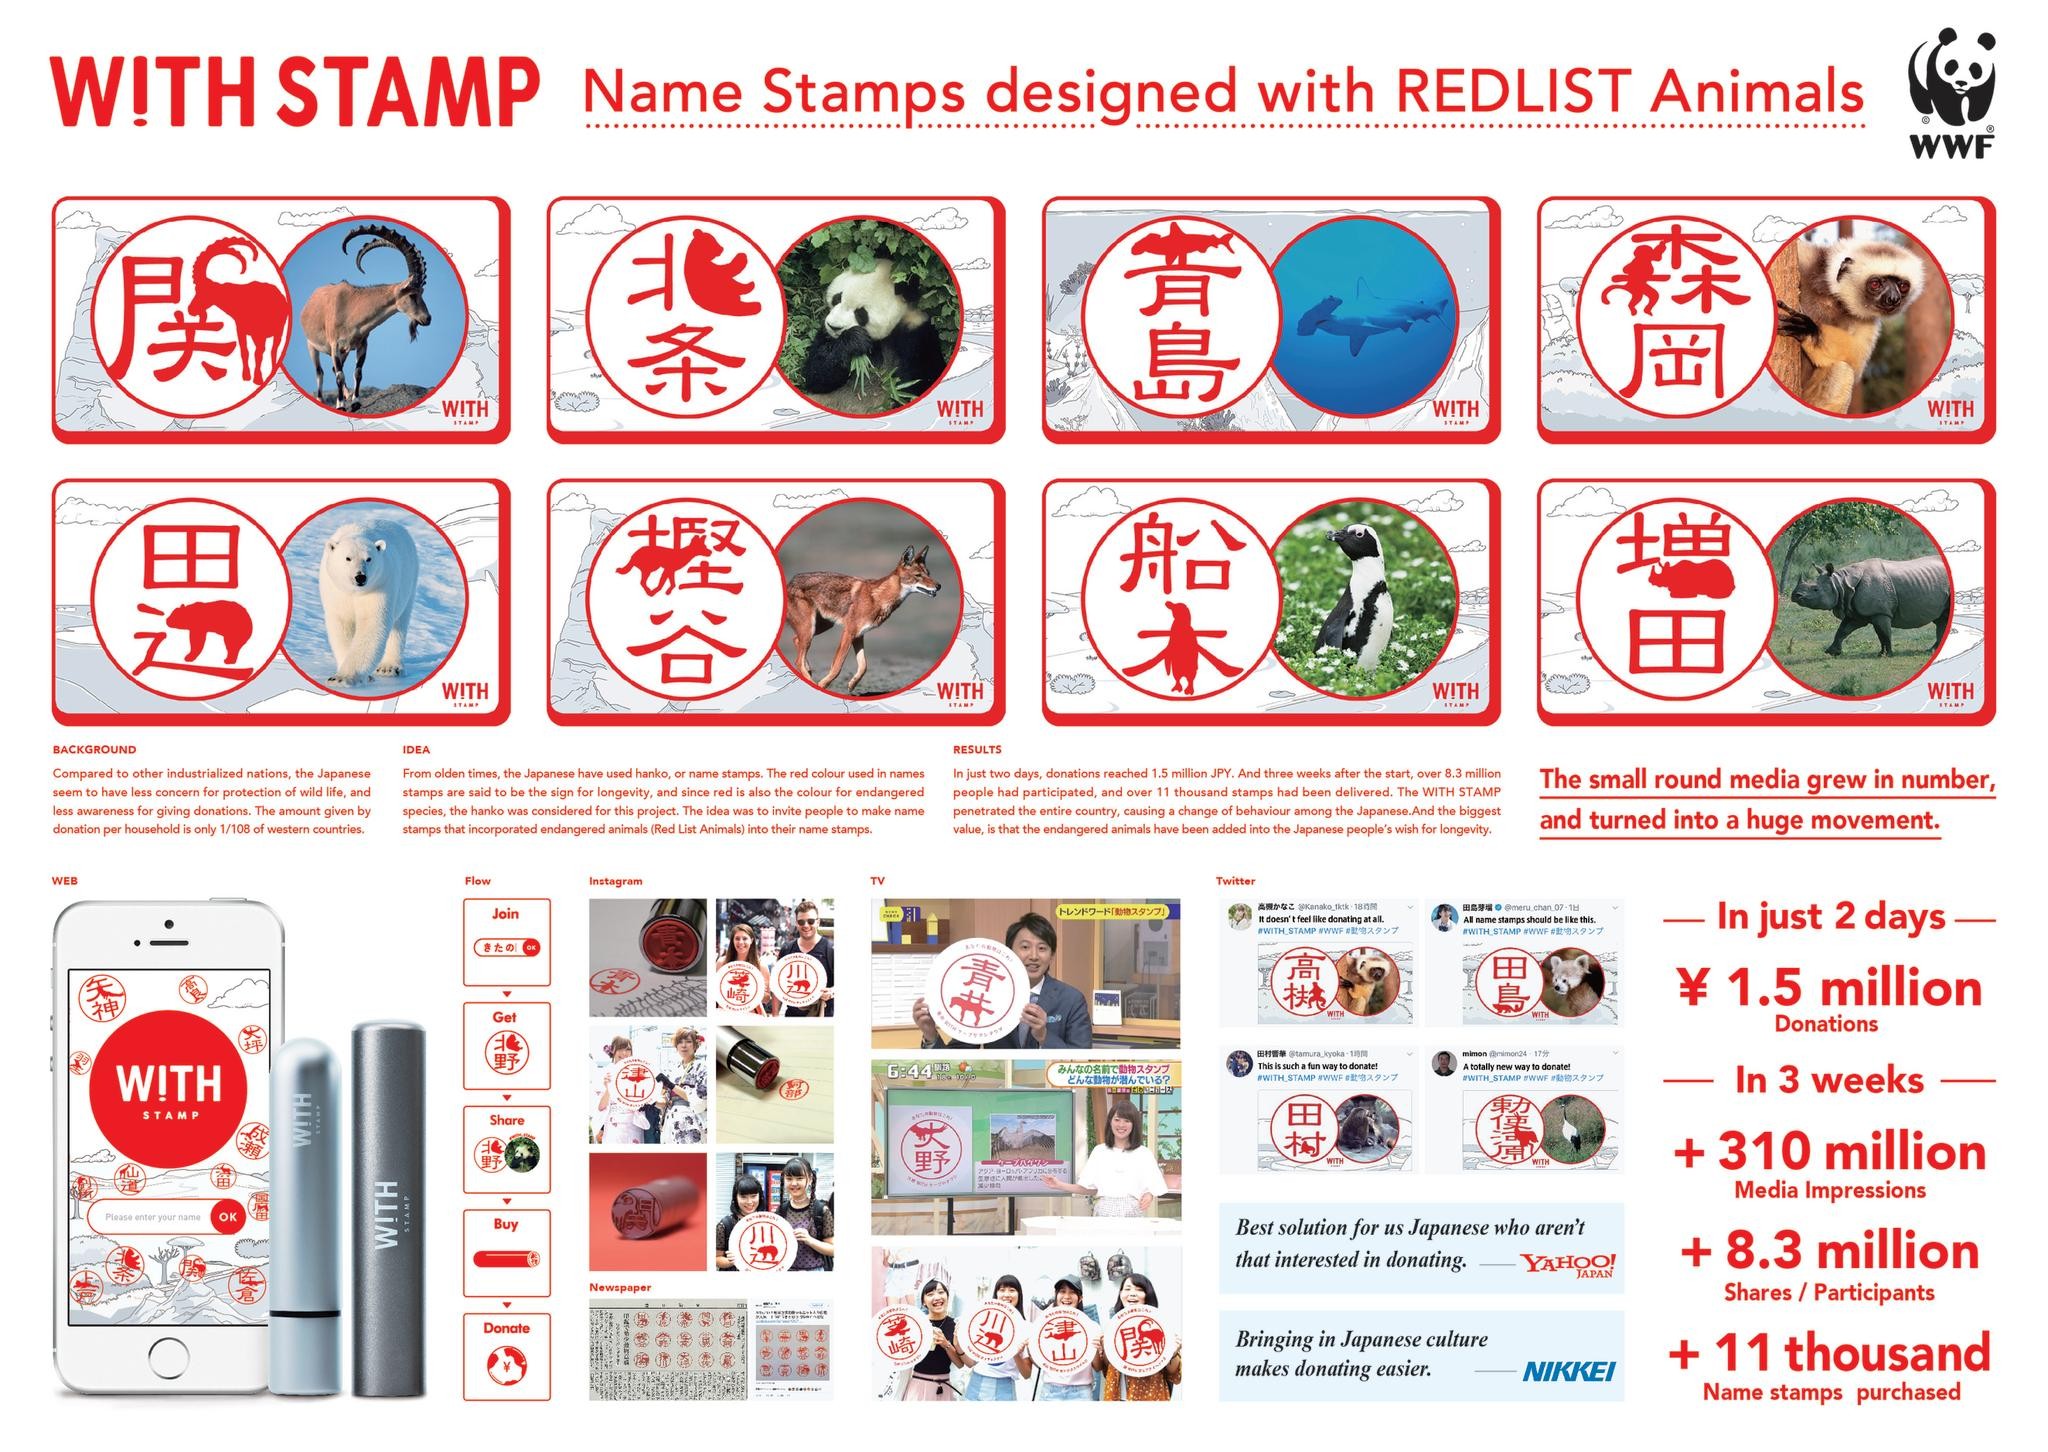 WITH STAMP (=Name Stamps designed with REDLIST Animals)